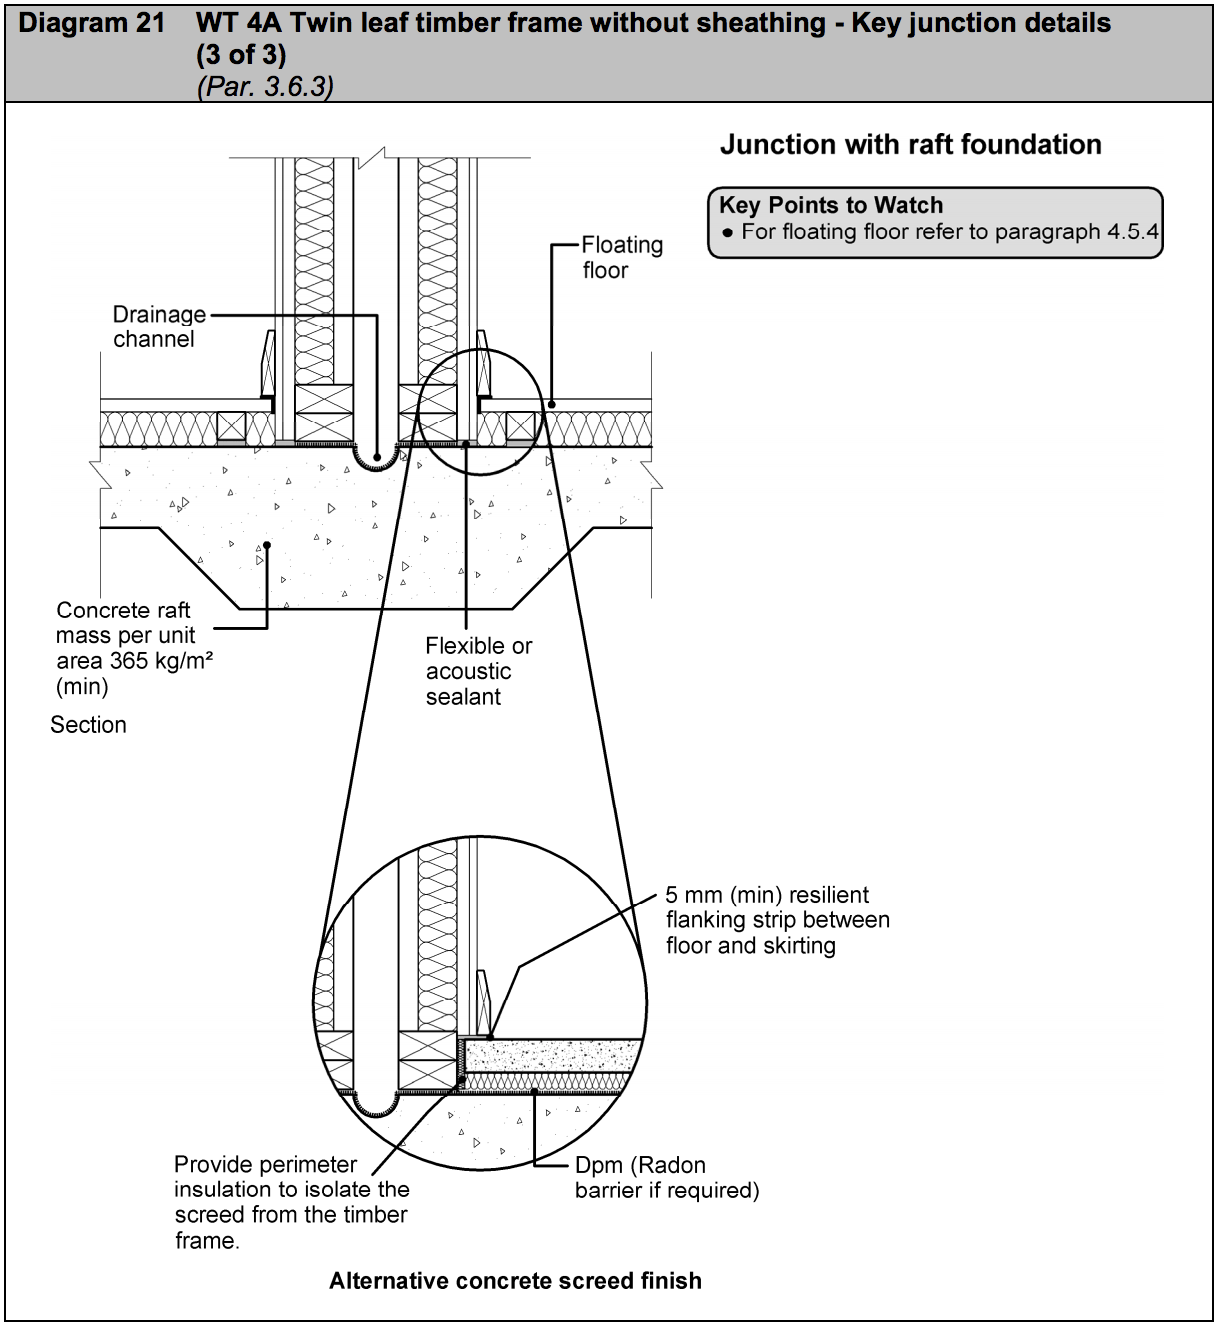 Diagram HE21 - WT 4A Twin leaf timber frame without sheathing - key junction details (3 of 3) - Extract from TGD E